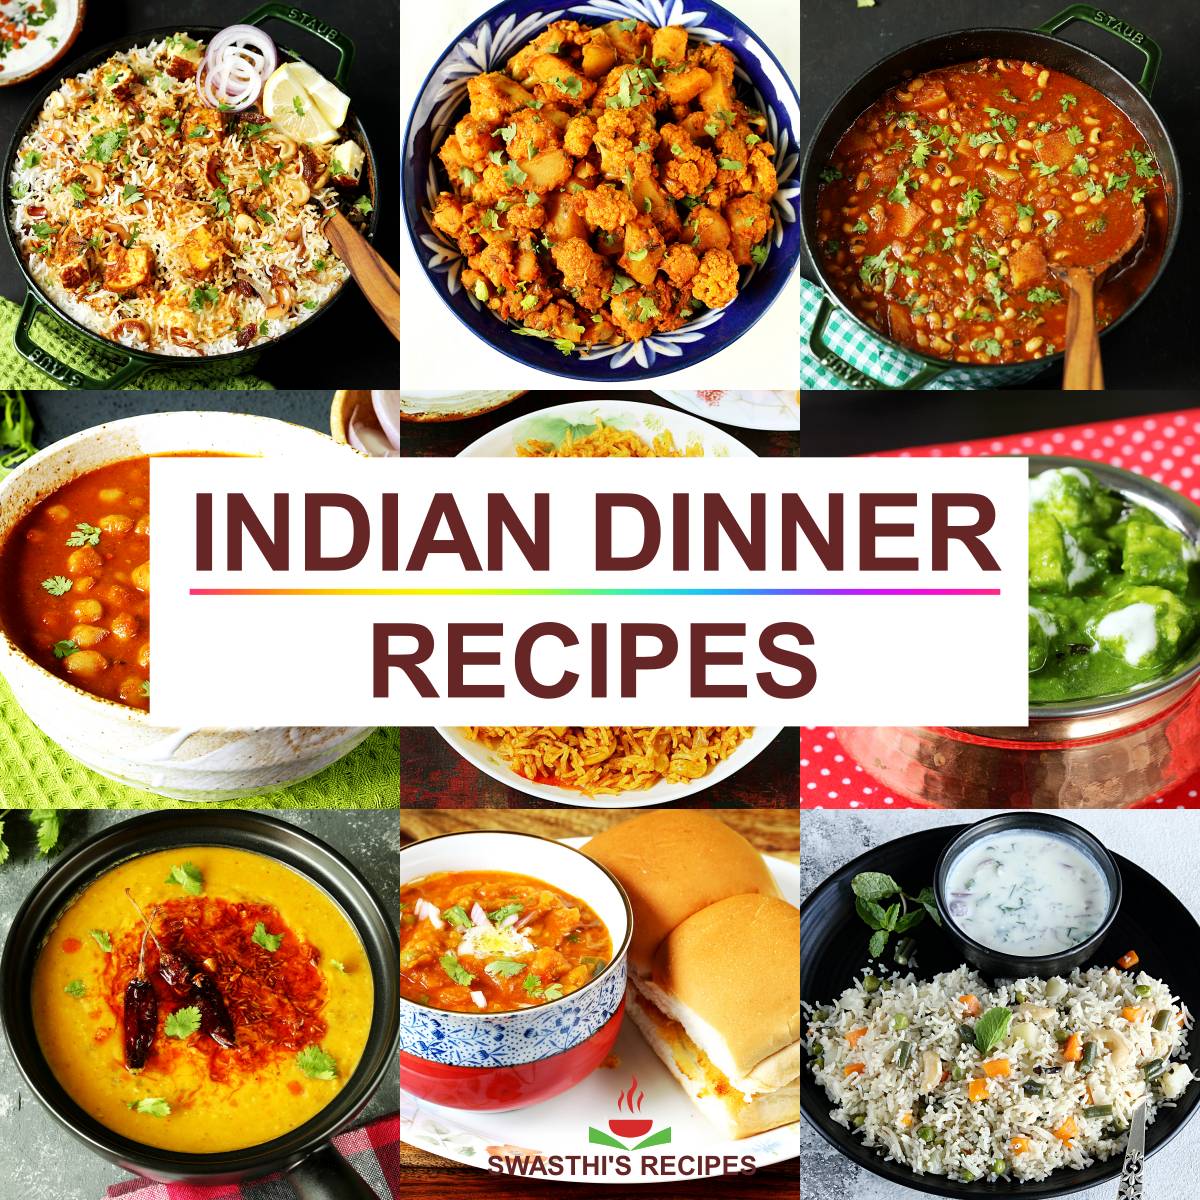 Indian Dinner Recipes: Delicious and Nutritious Meals for a Flavorful Evening